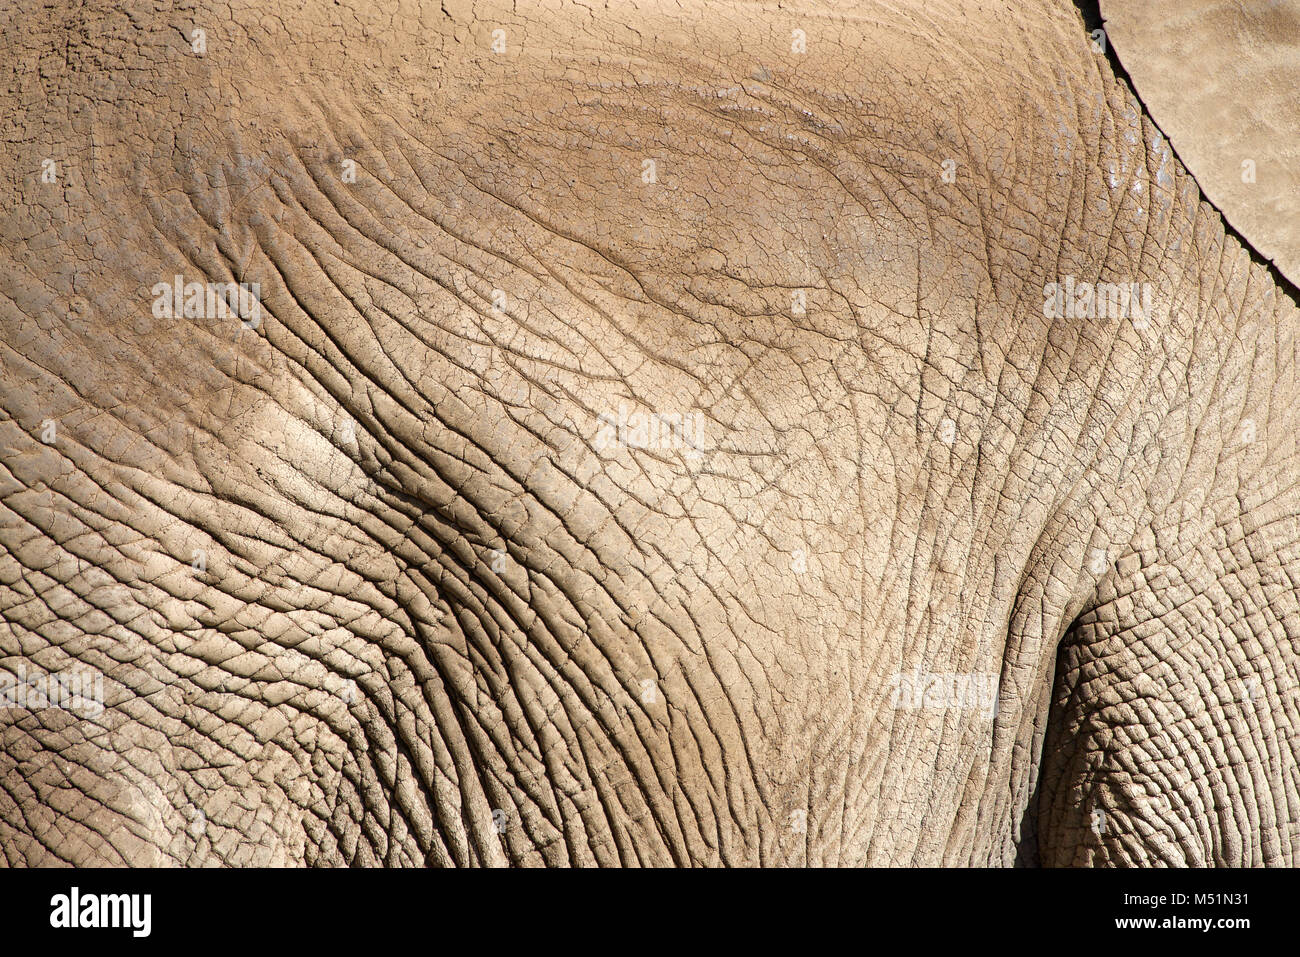 Side view close up of elephant hide. African elephants are listed as vulnerable by the International Union for Conservation of Nature (IUCN) while the Stock Photo